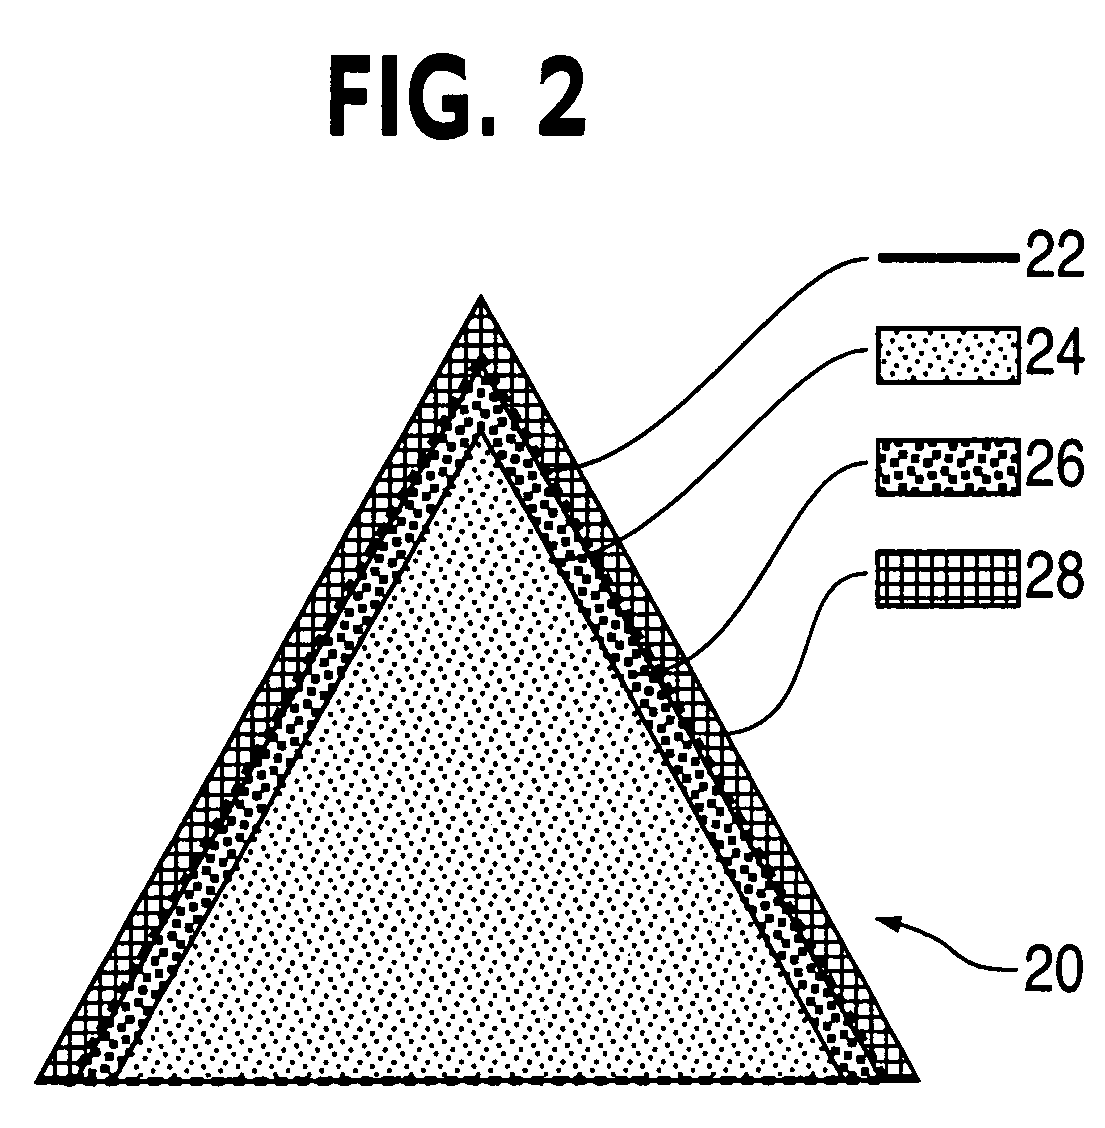 Treatment process for improving the mechanical, catalytic, chemical, and biological activity of surfaces and articles treated therewith